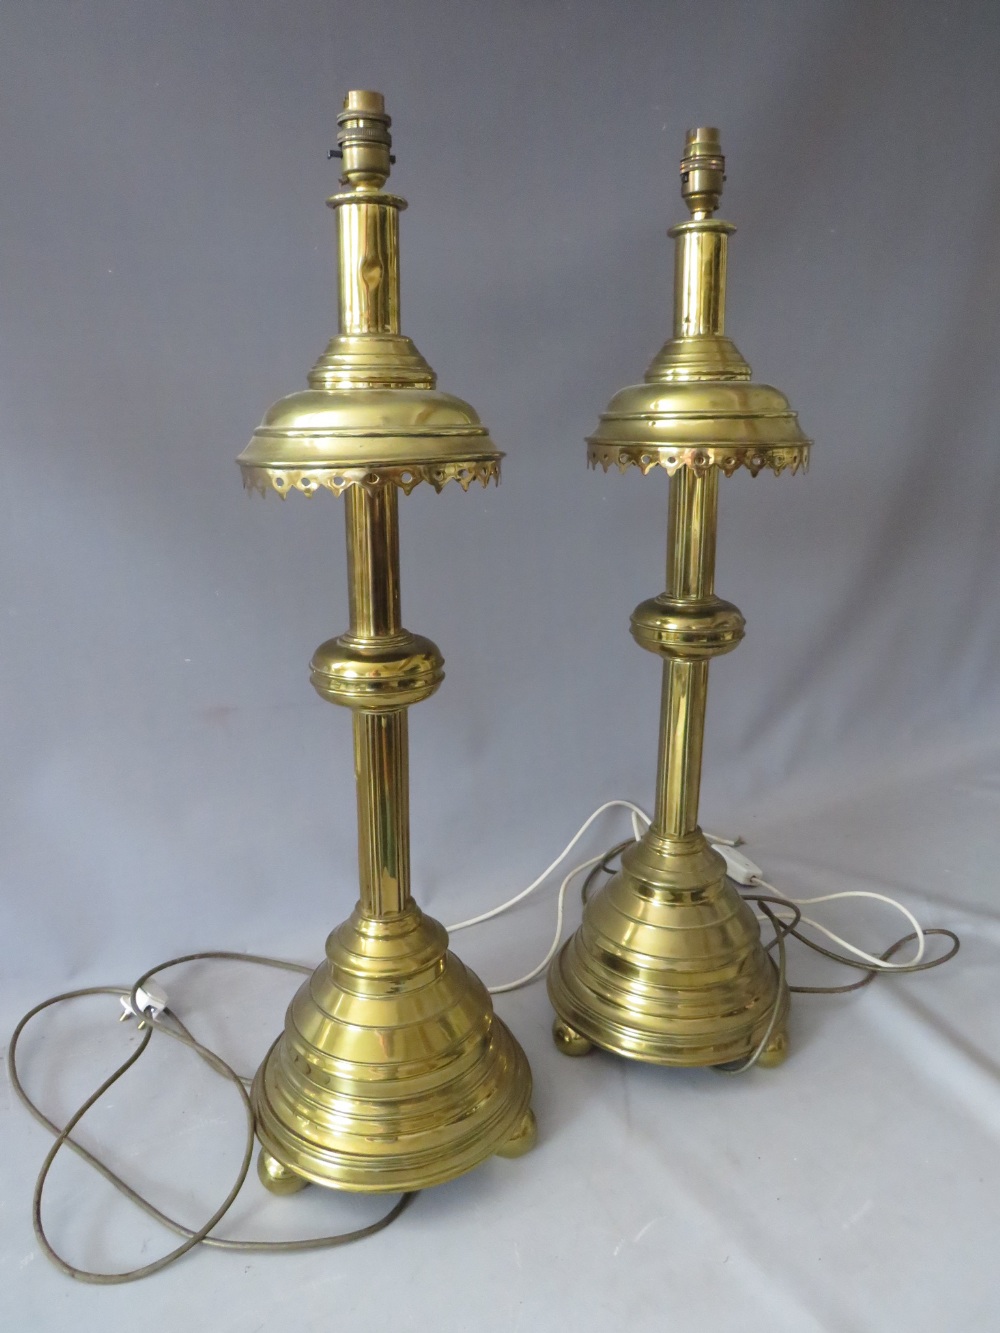 A PAIR OF EARLY 20TH CENTURY HEAVY BRASS ECCLESIASTICAL STYLE CANDLE STANDS CONVERTED TO TABLE - Image 3 of 3